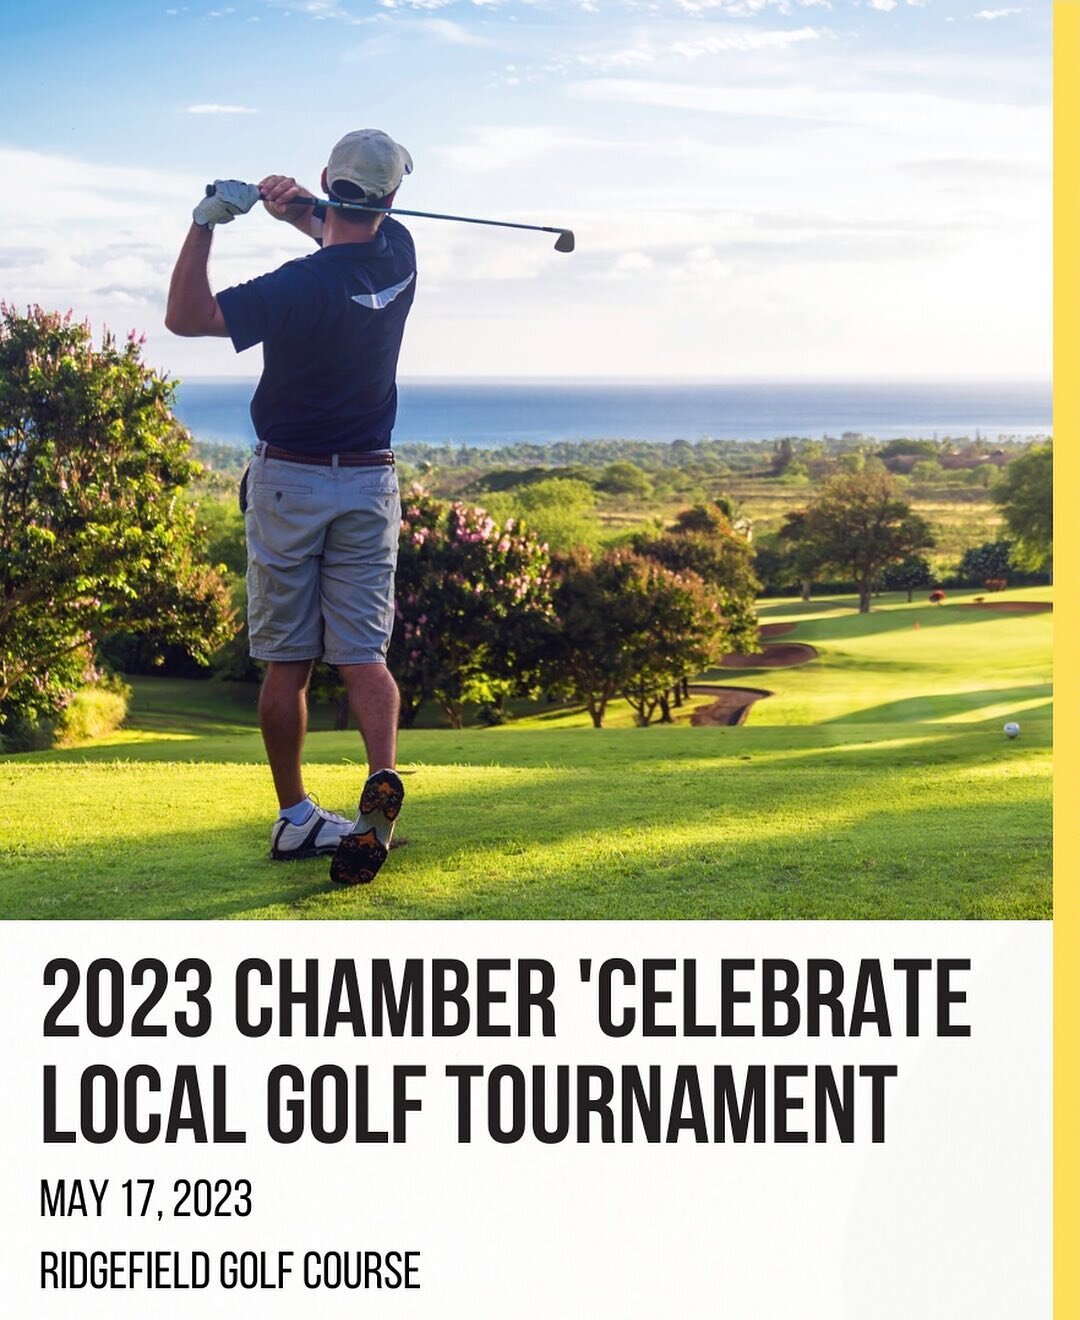 Will you be there?

The Ridgefield Chamber of Commerce &lsquo;Support Local&rsquo; Golf tournament is happening tomorrow.

May 17 at Ridgefield Golf Course. 

An awesome day of golf, good company and great food.

Can&rsquo;t wait to see you there.

@